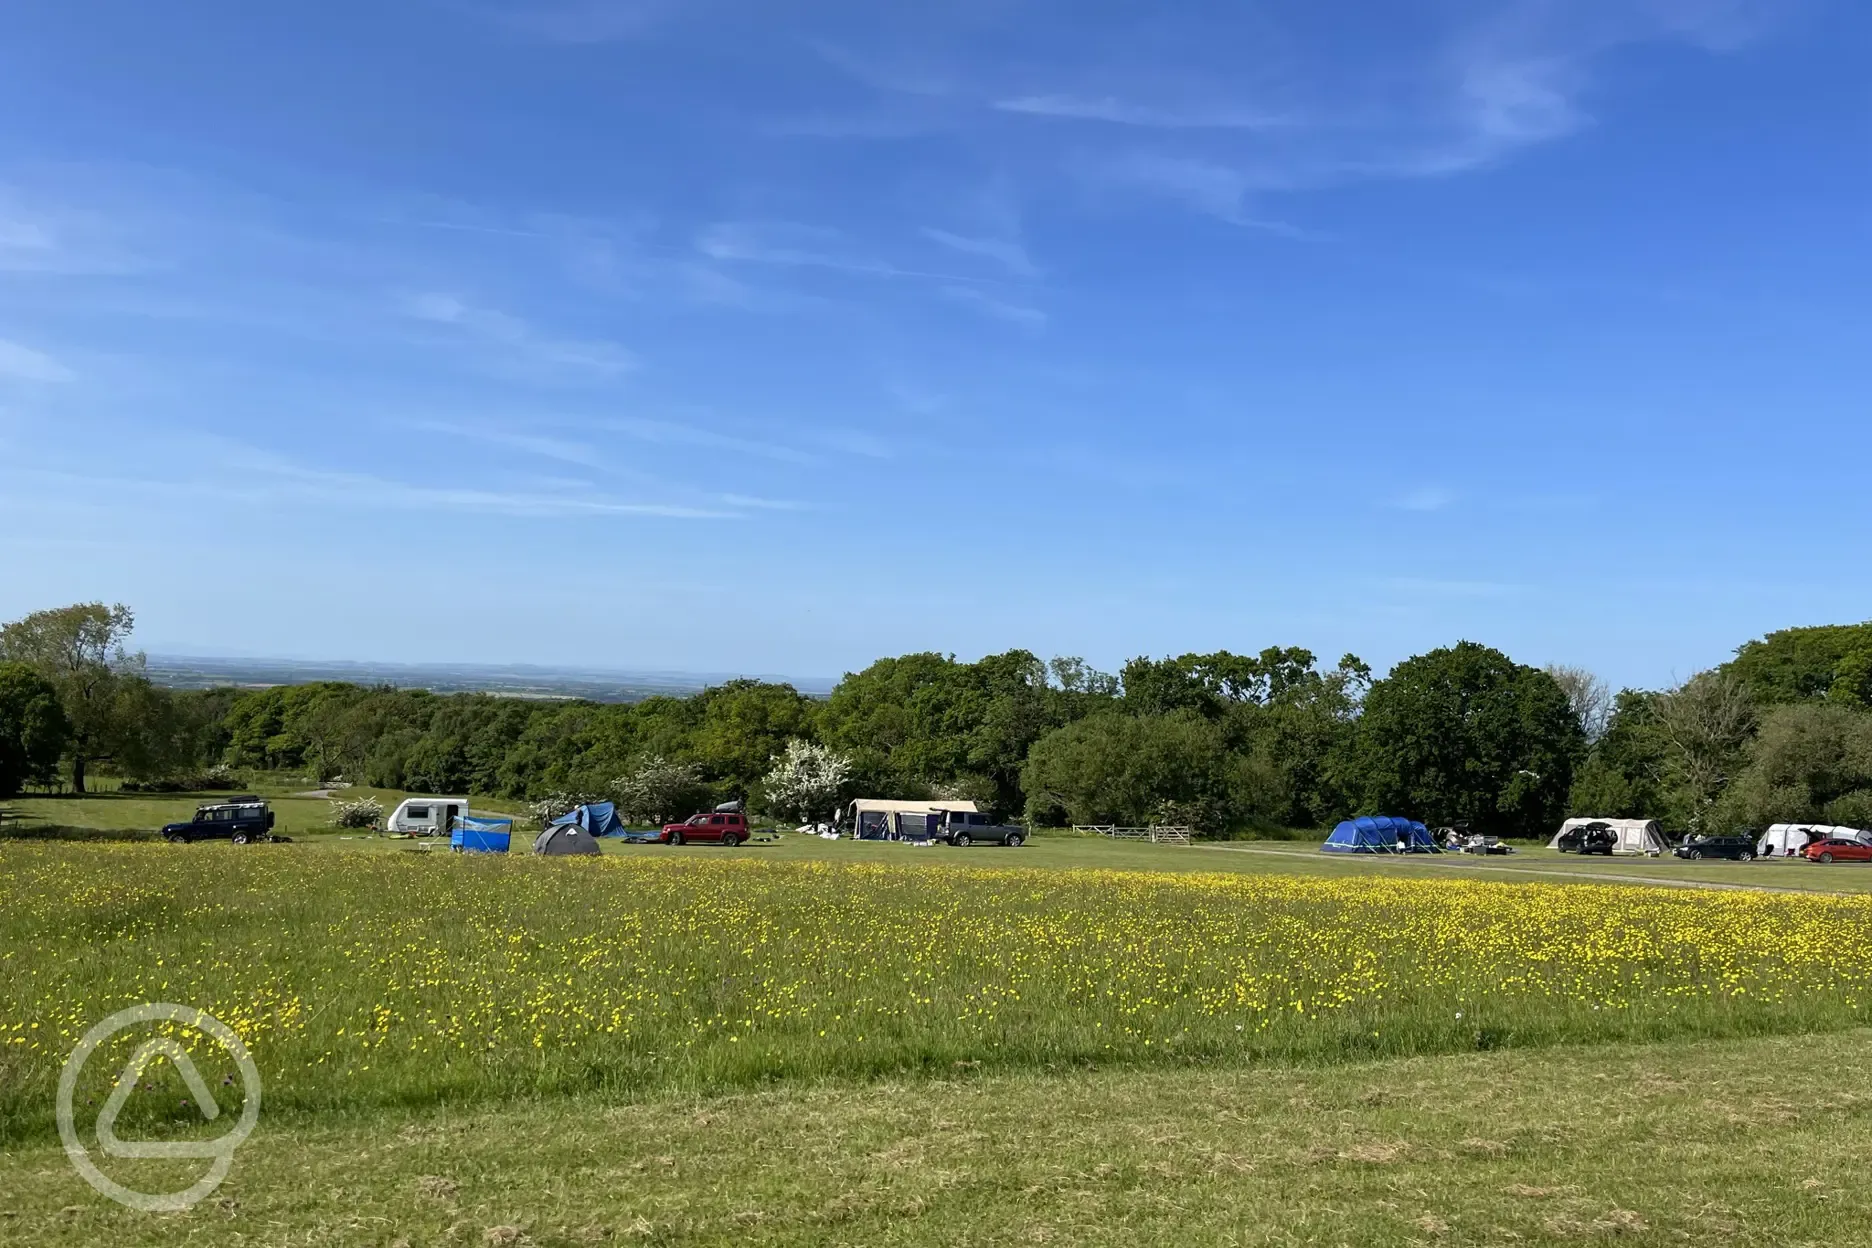 Camping field with views of the Solway Firth